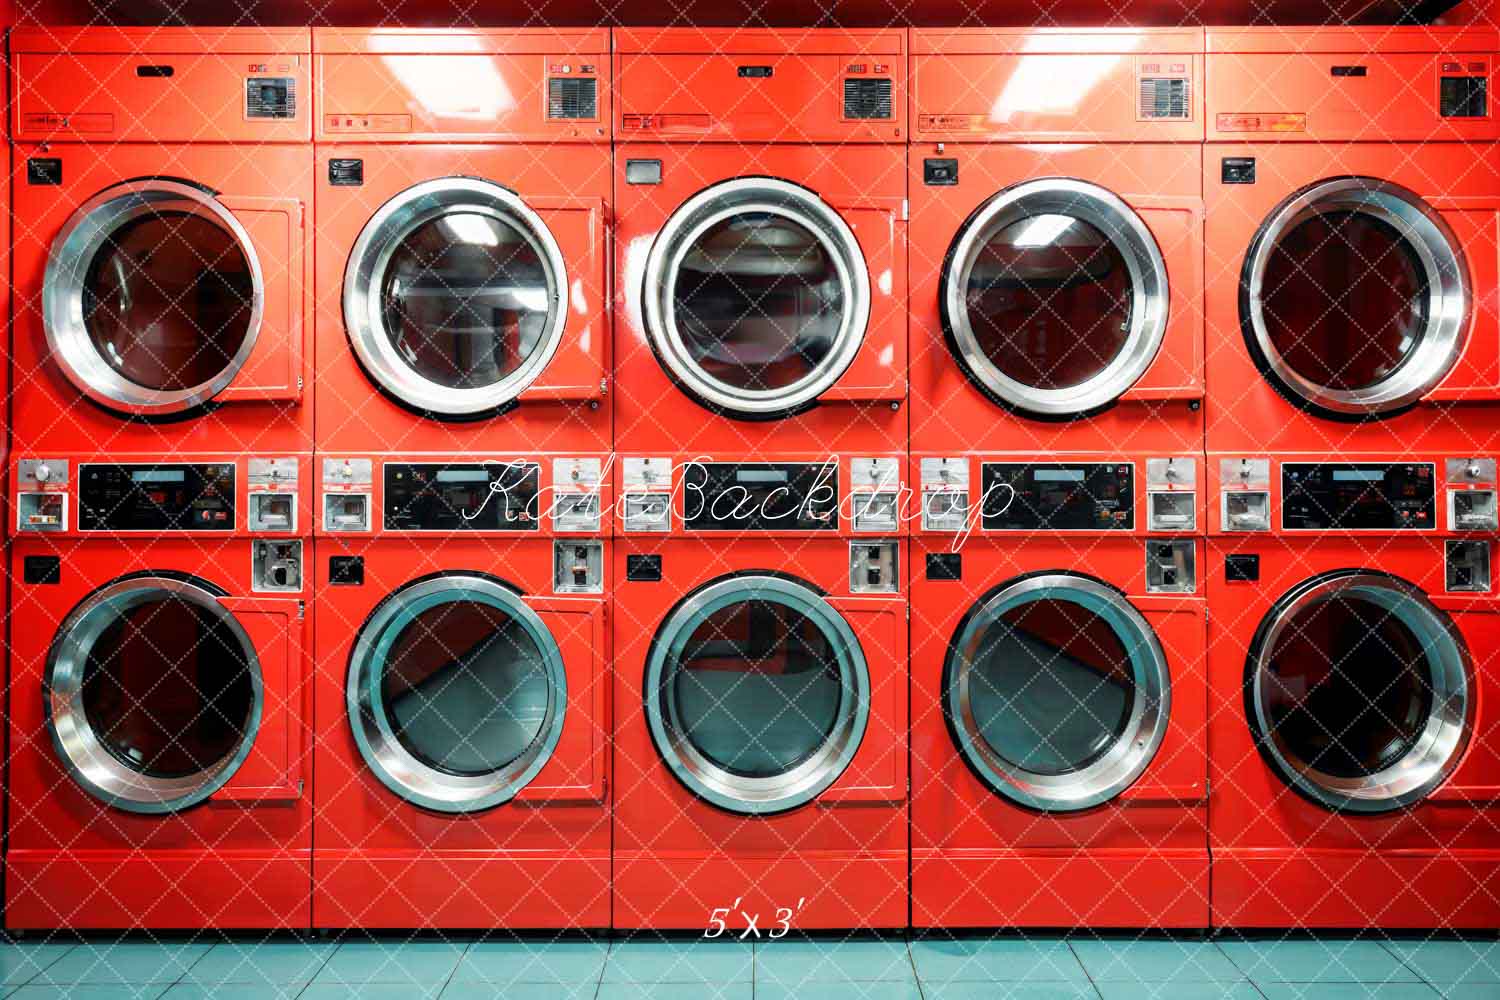 Kate Laundry Day Red Washing Machine Room Backdrop Designed by Emetselch